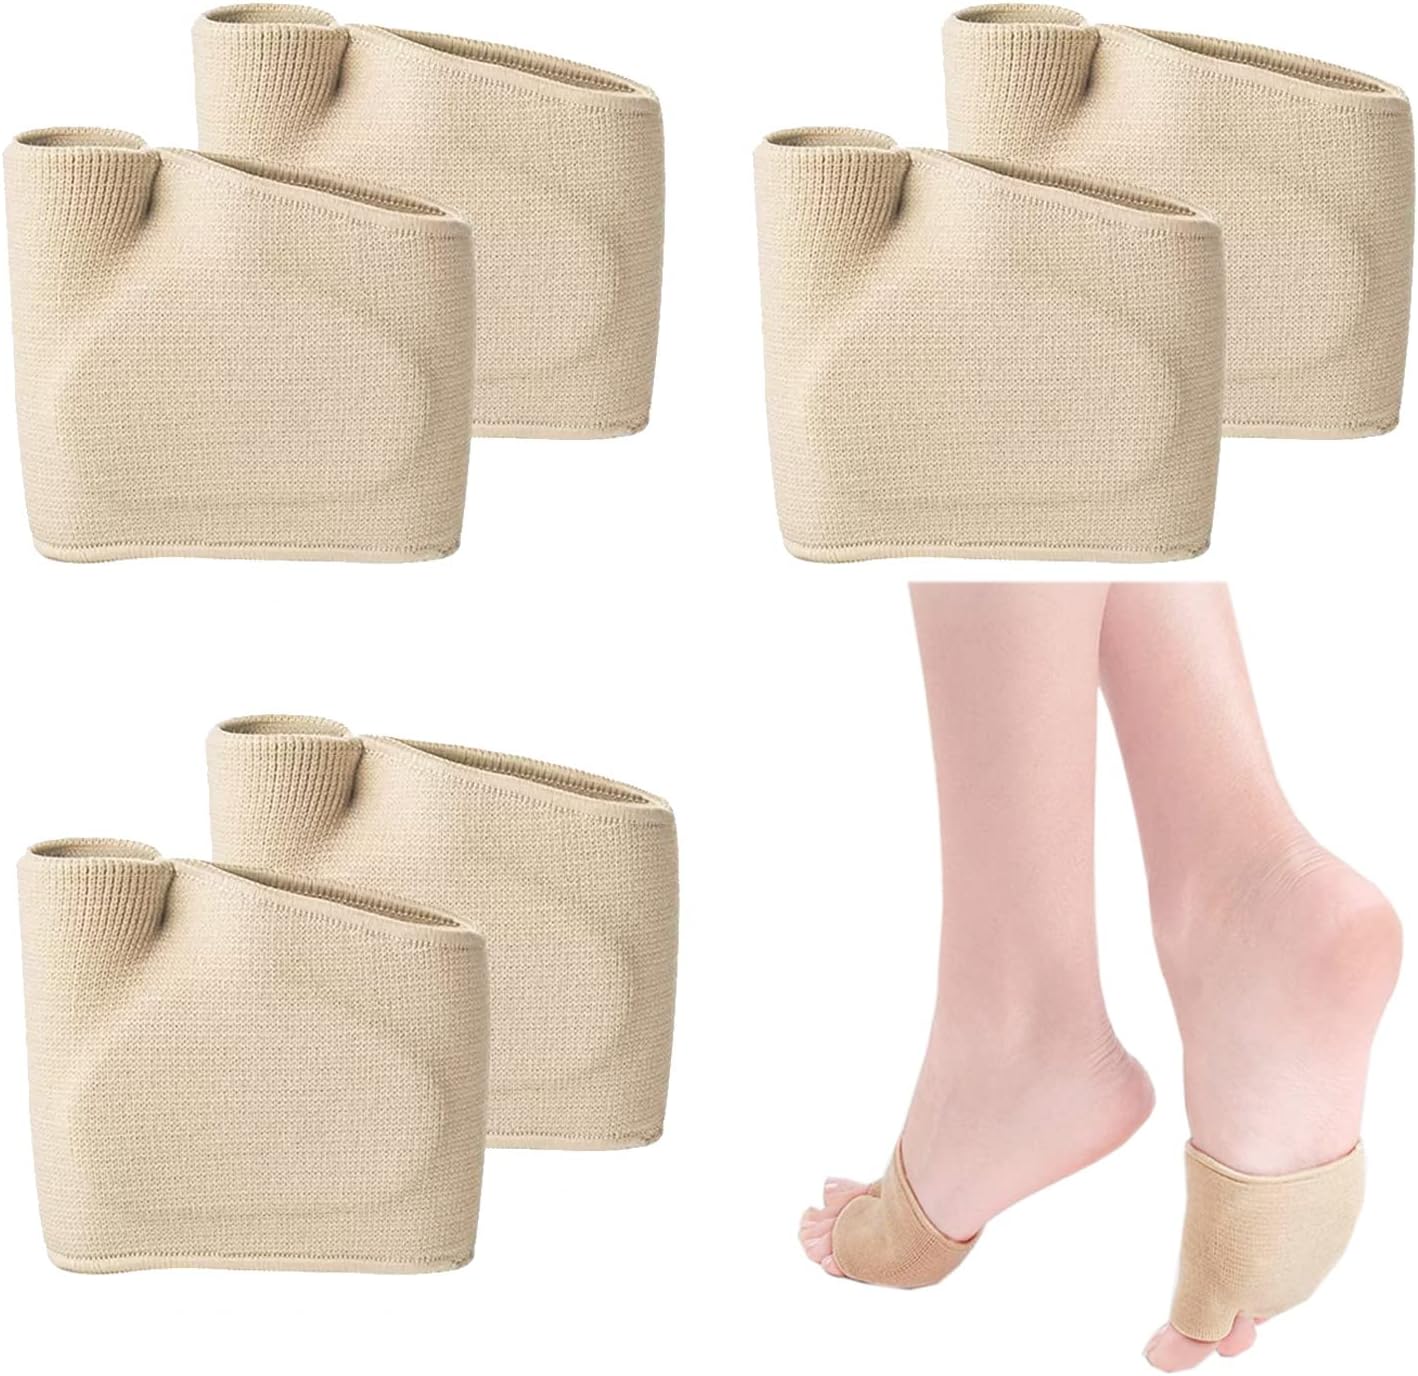 3 Pairs of Metatarsal Pads for Women and Men, Ball of [...]